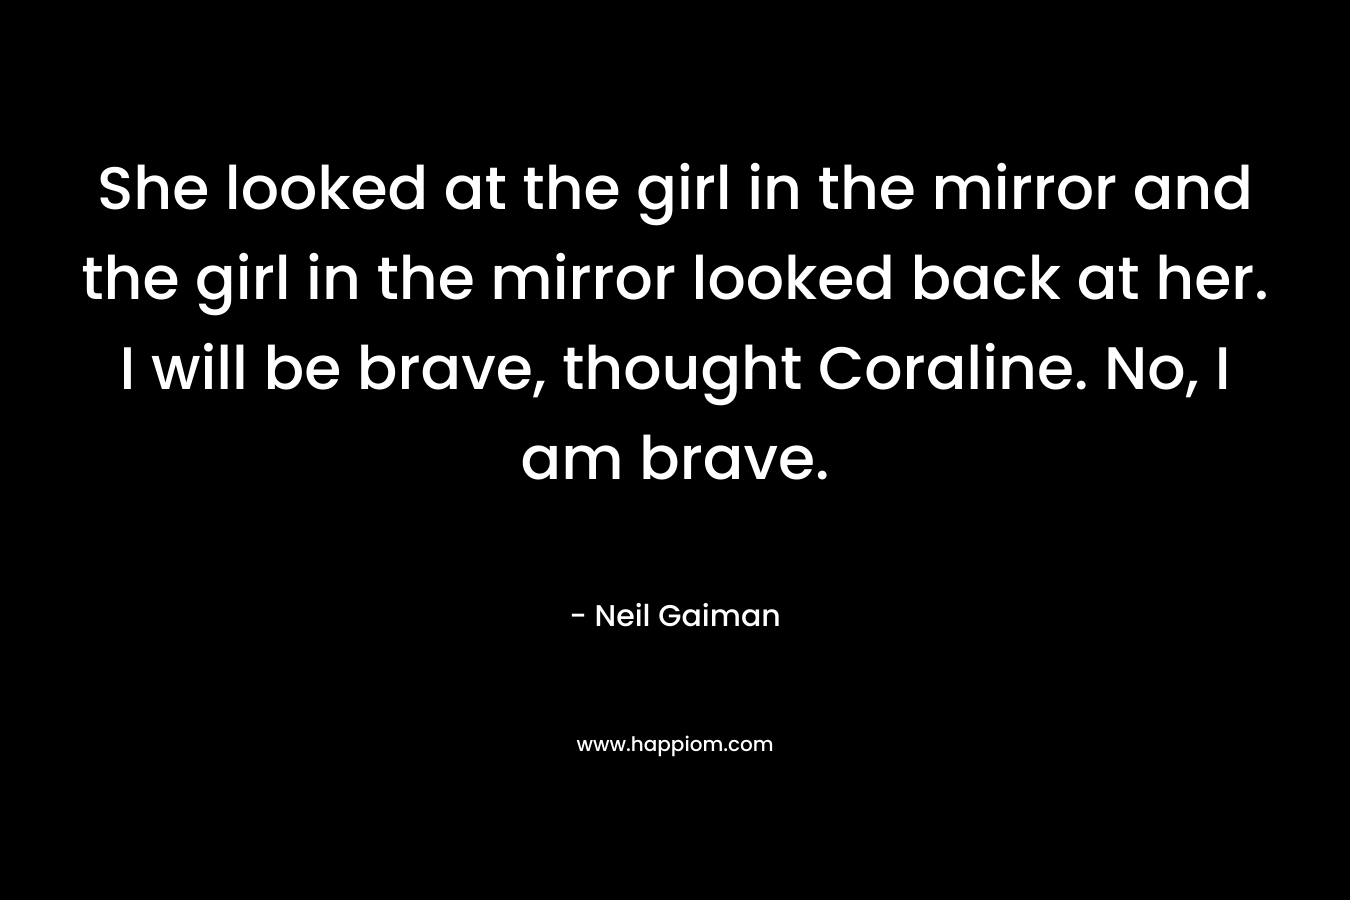 She looked at the girl in the mirror and the girl in the mirror looked back at her. I will be brave, thought Coraline. No, I am brave.